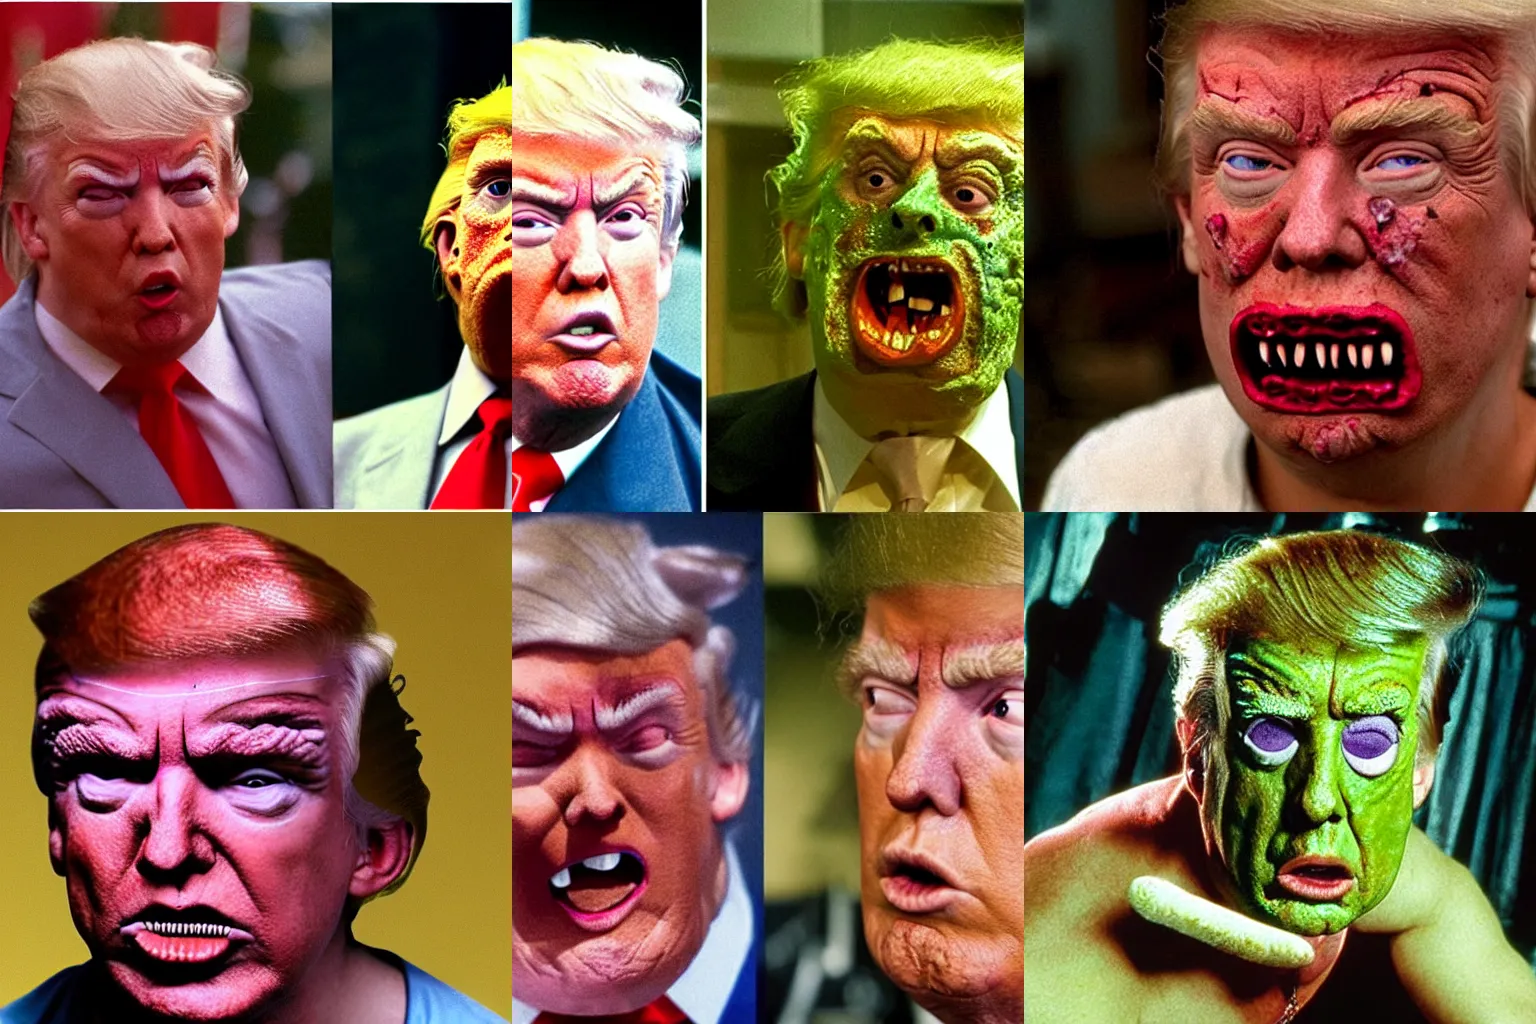 Prompt: donald trump as a disfigured character from the toxic avenger, oozing pustules, david cronenberg